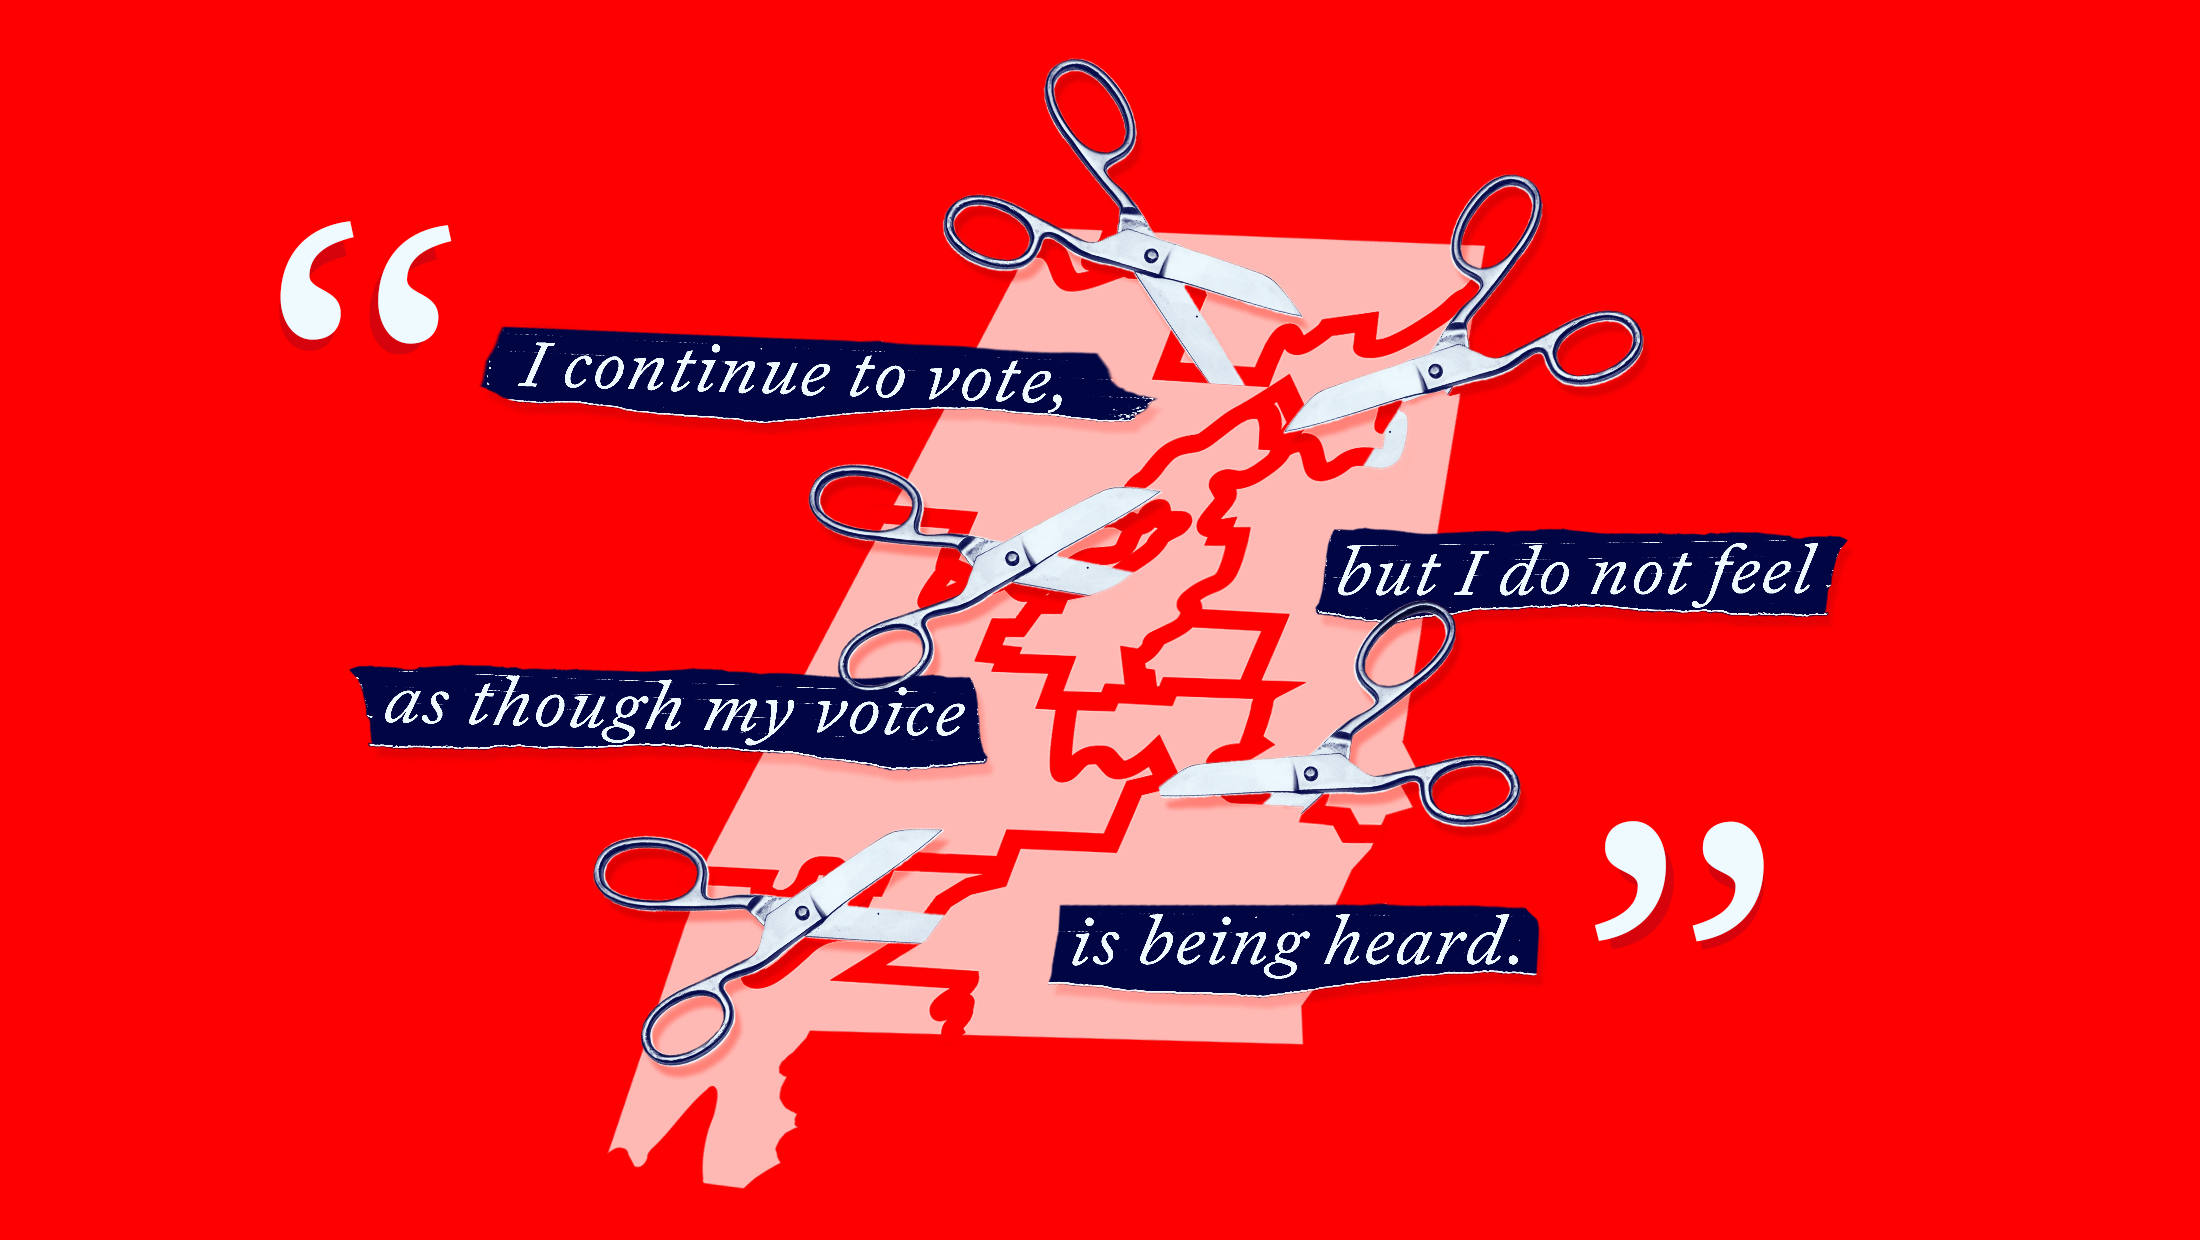 On a bright red background, a light red map of Alabama is being cut up by scissors. A broken quote that reads "I continue to vote but I do not feel as though my voice is being heard."